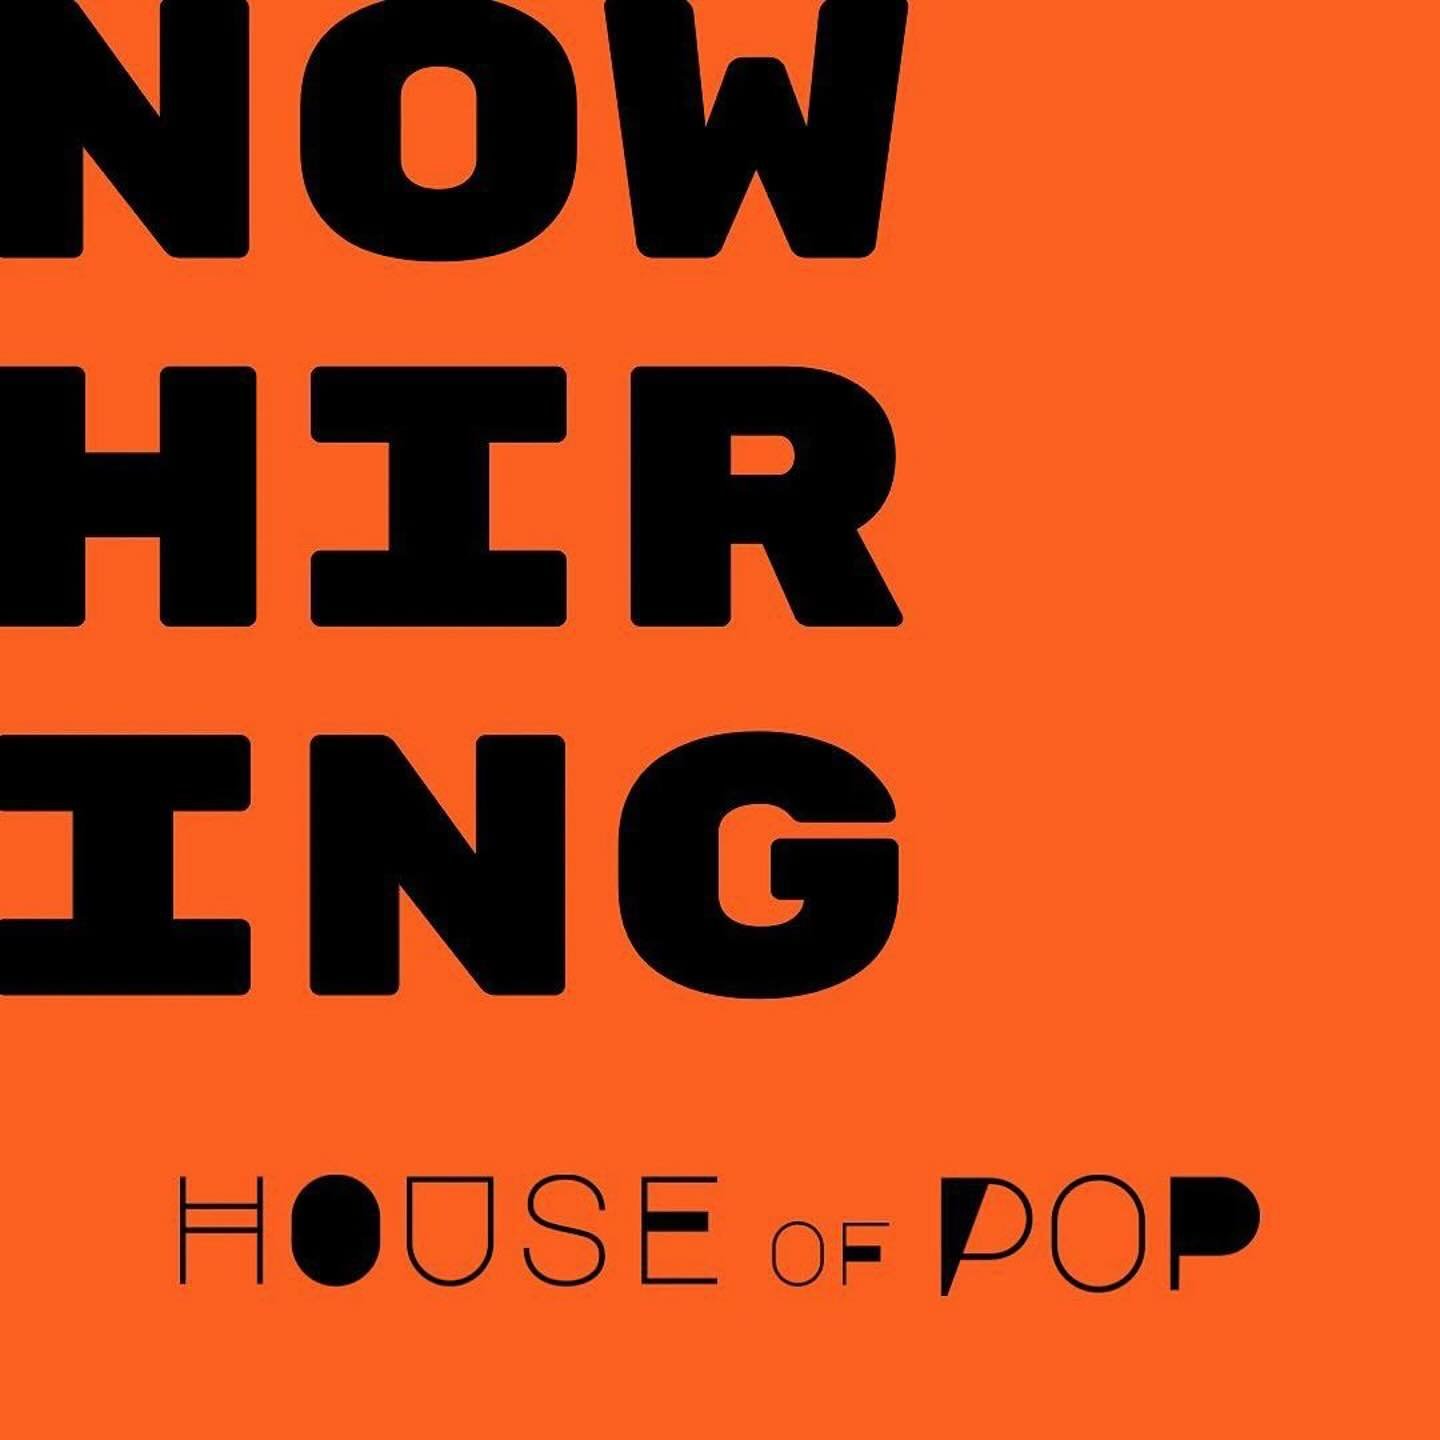 We are adding to our amazing team of hardcore hairdressers! We are looking for rad, experienced hairdressers who are cut &amp; color focused and education obsessed. 

We offer commission based compensation, have a full front of house support staff to